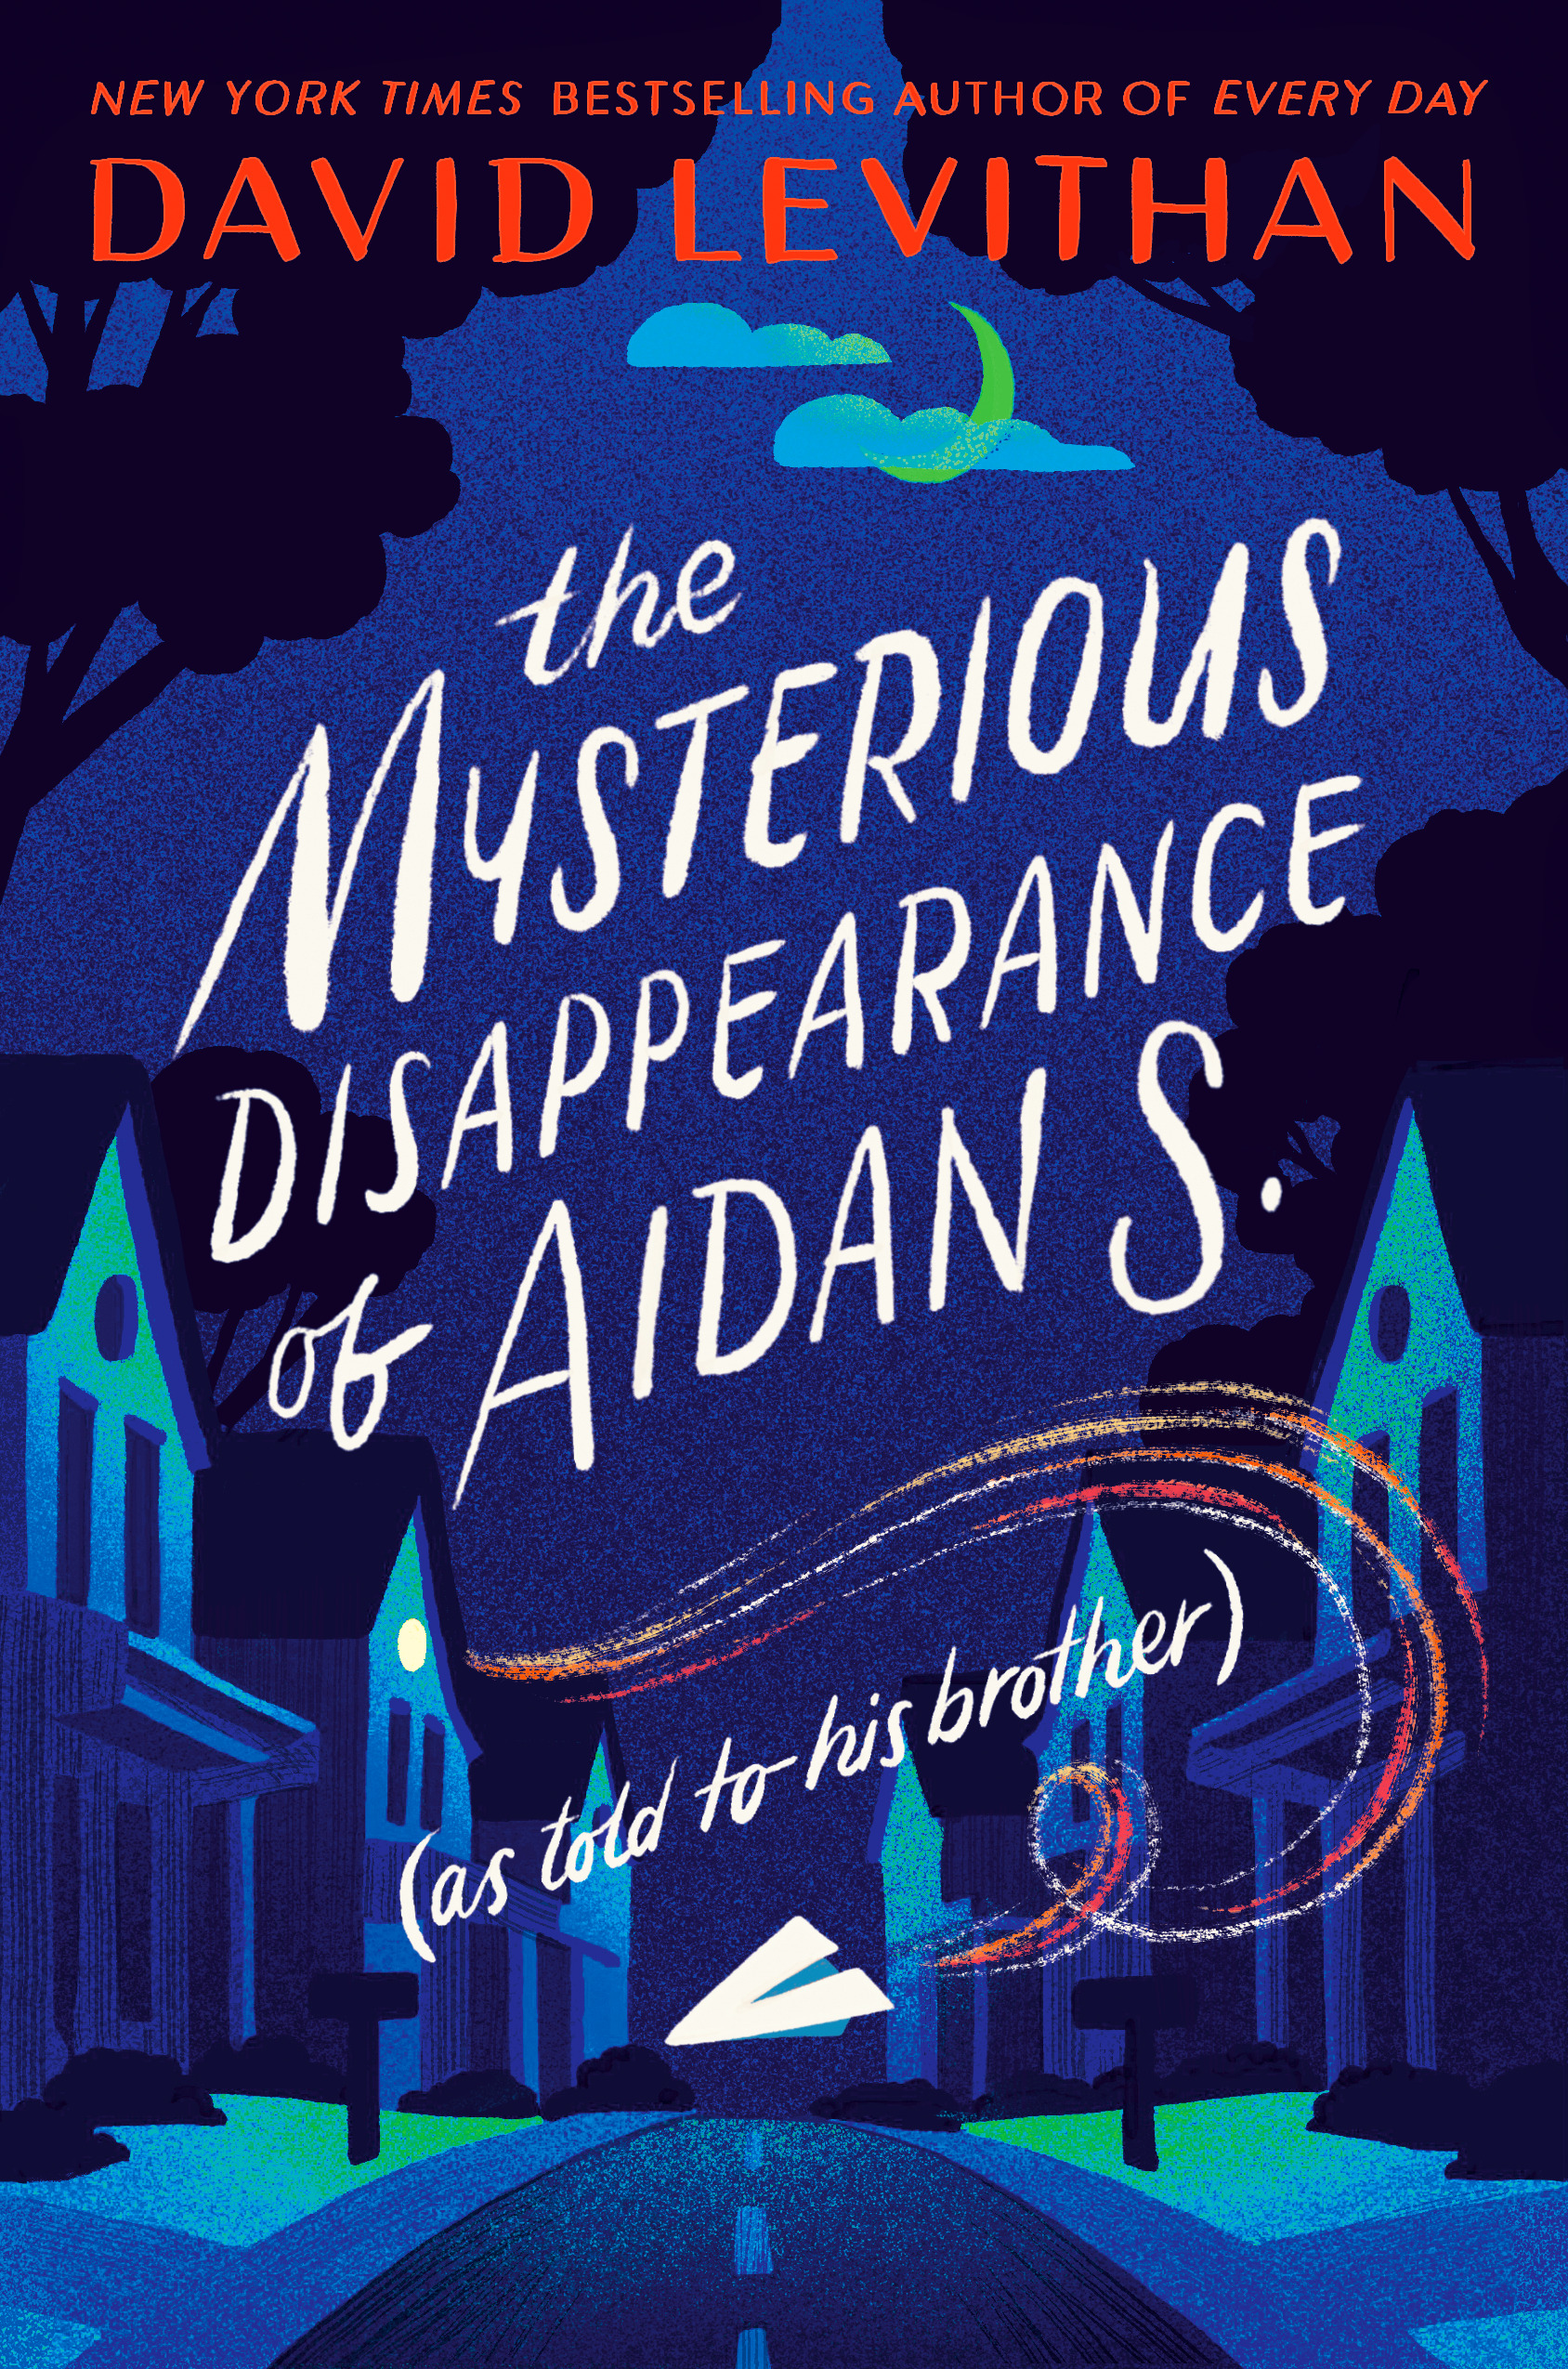 The Mysterious Disappearance of Aidan S. (as told to his brother) | Levithan, David